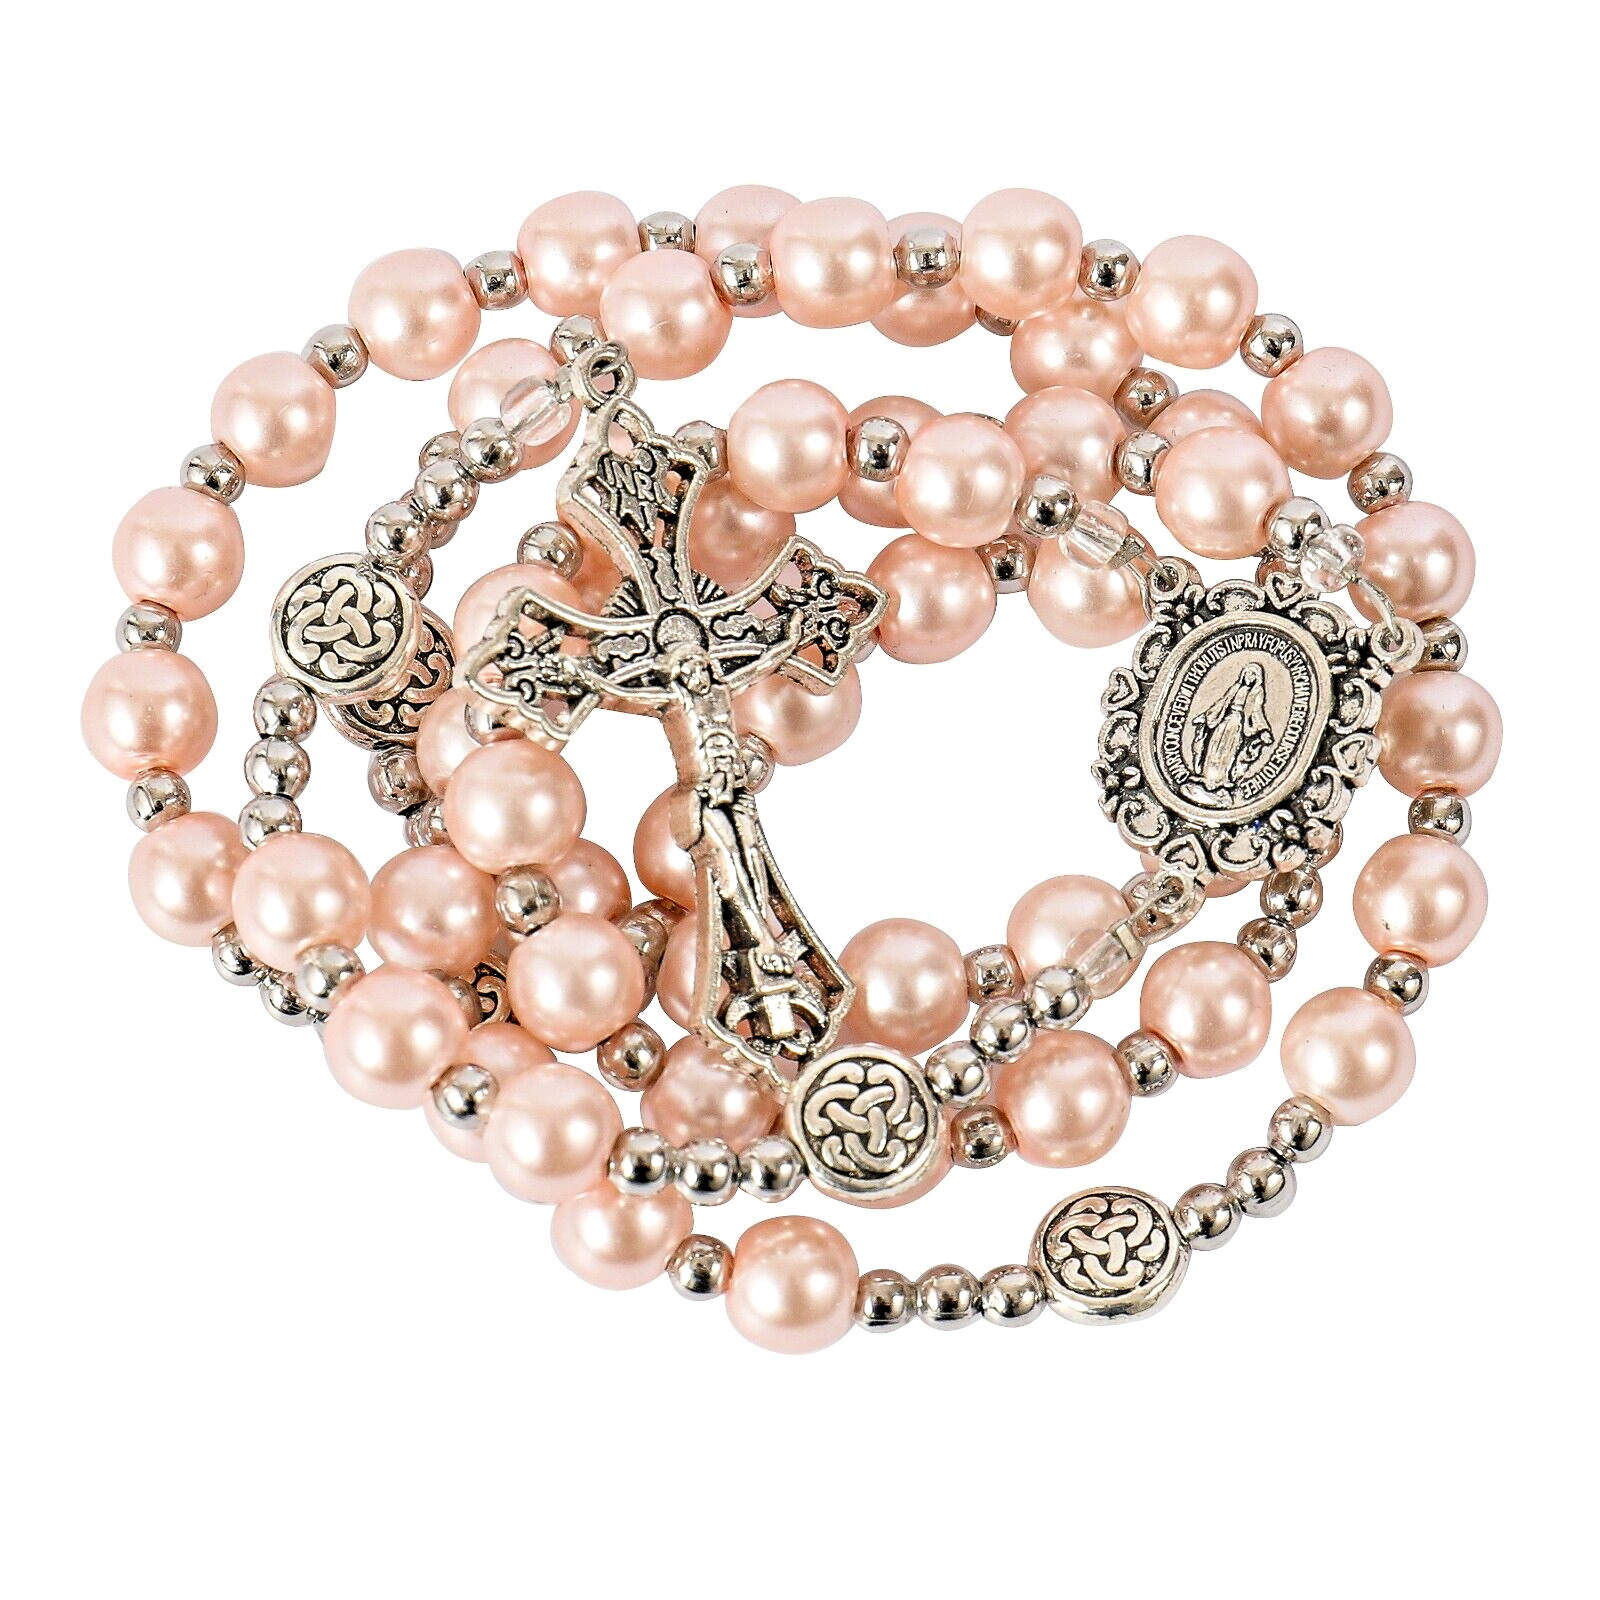 Pink Pearl Beaded Rosary Necklace with Miraculous Medal and Cross Crucifix